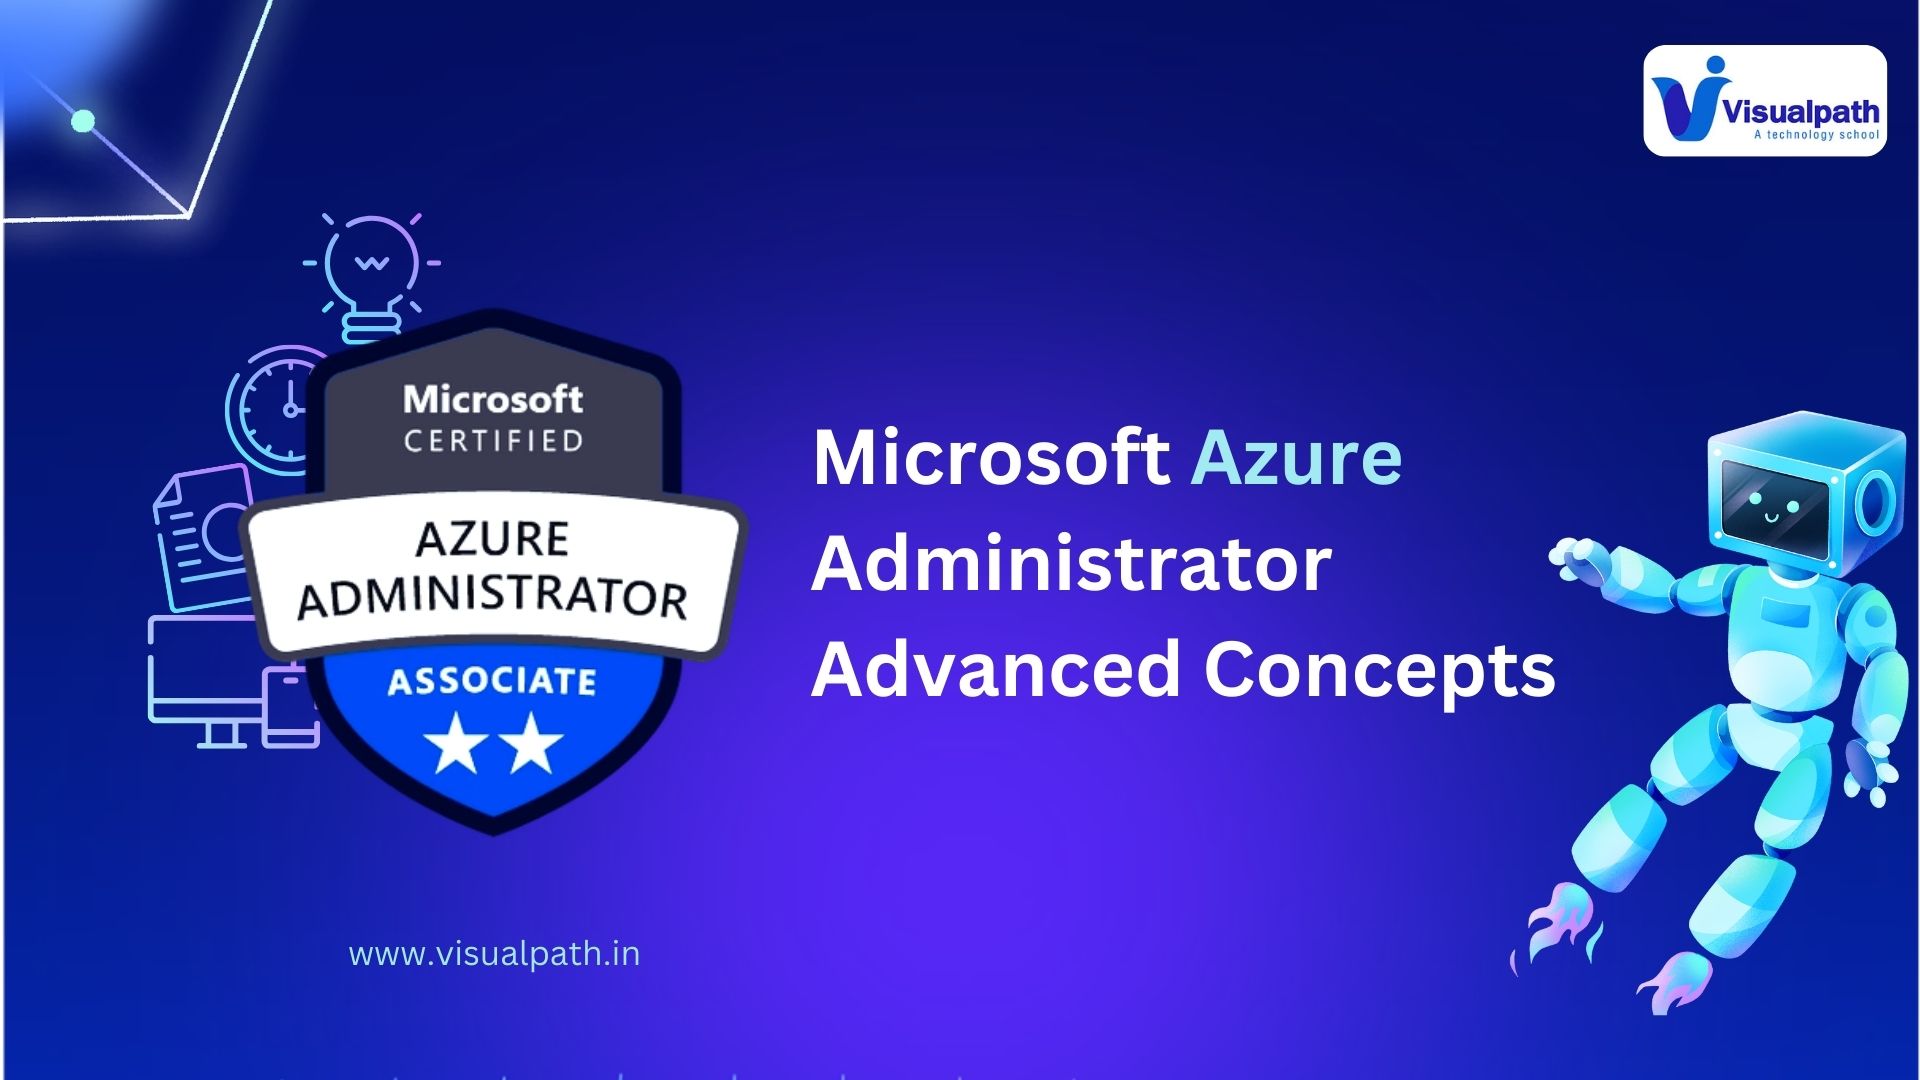 What are The Microsoft Azure Administrator Advanced Concepts?